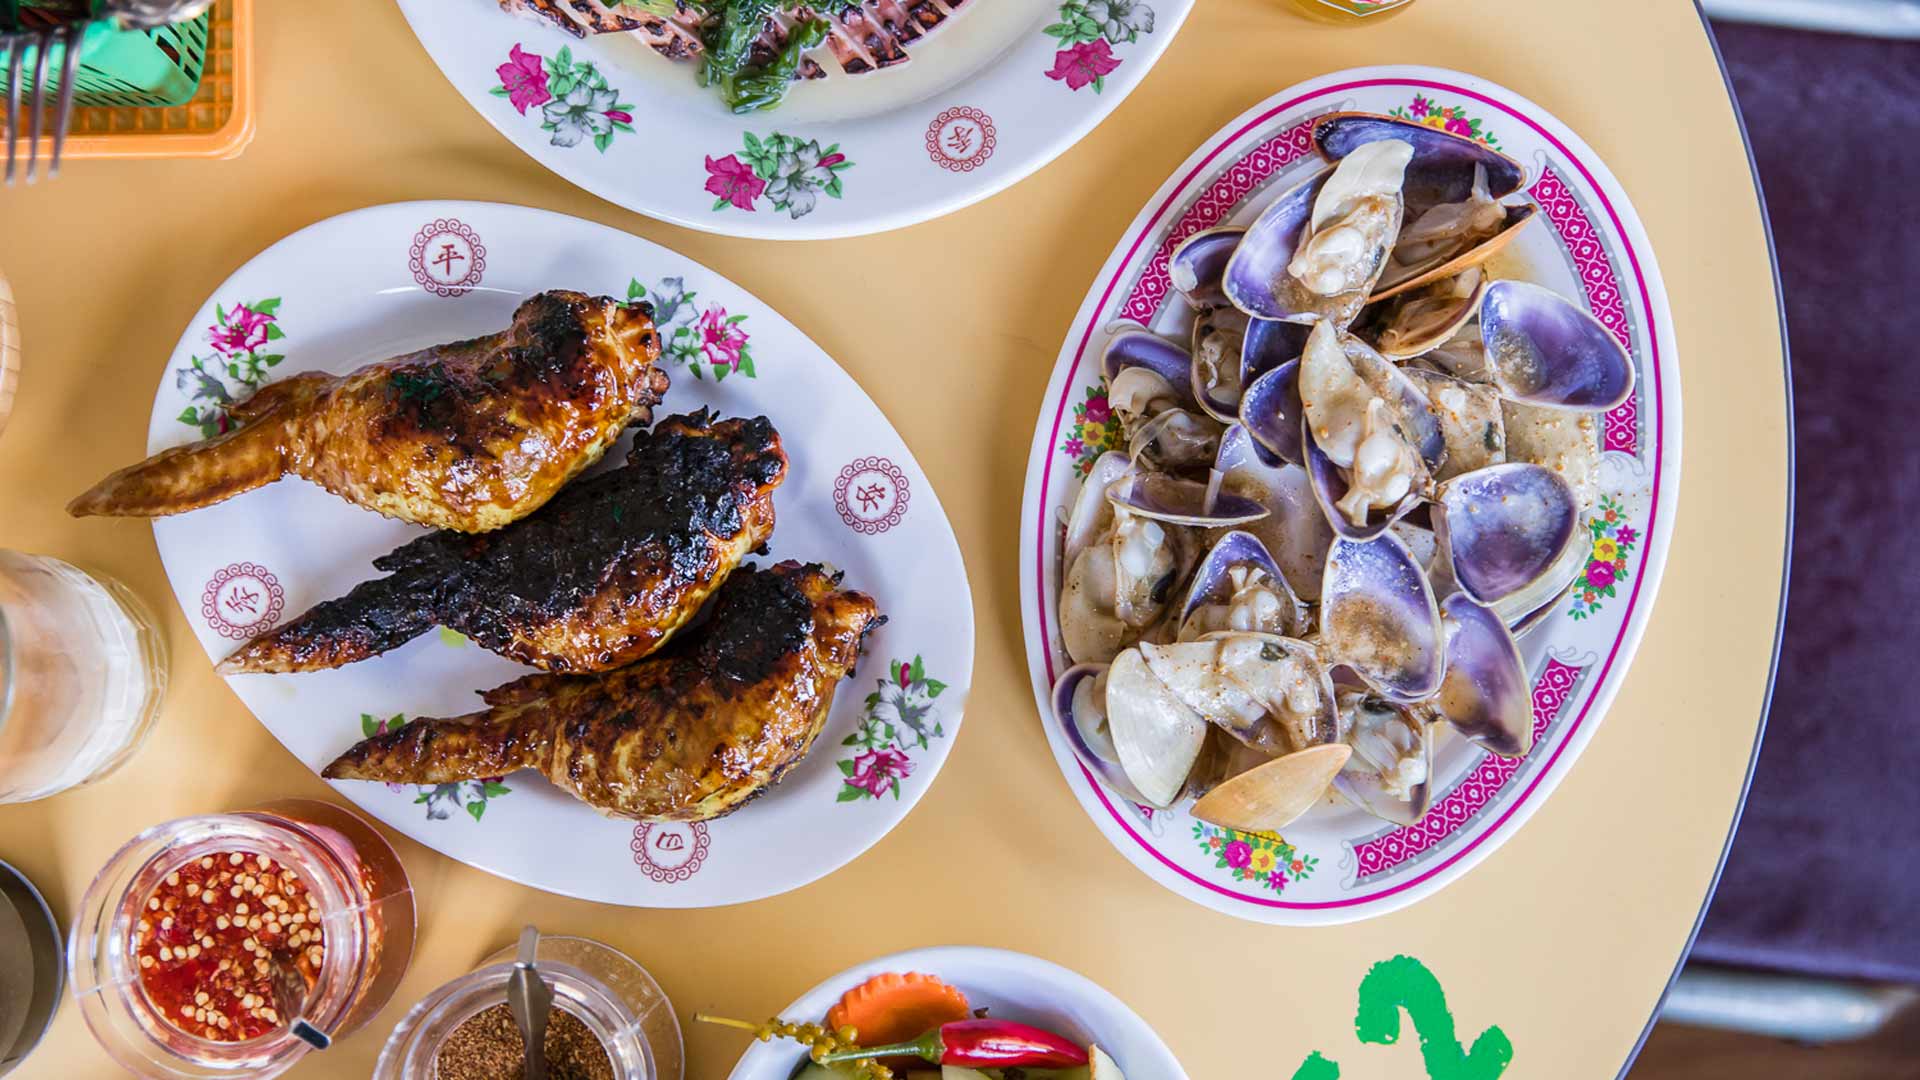 ACME and Merivale's Cambodian Street Food Pop-Up Is Opening This Week